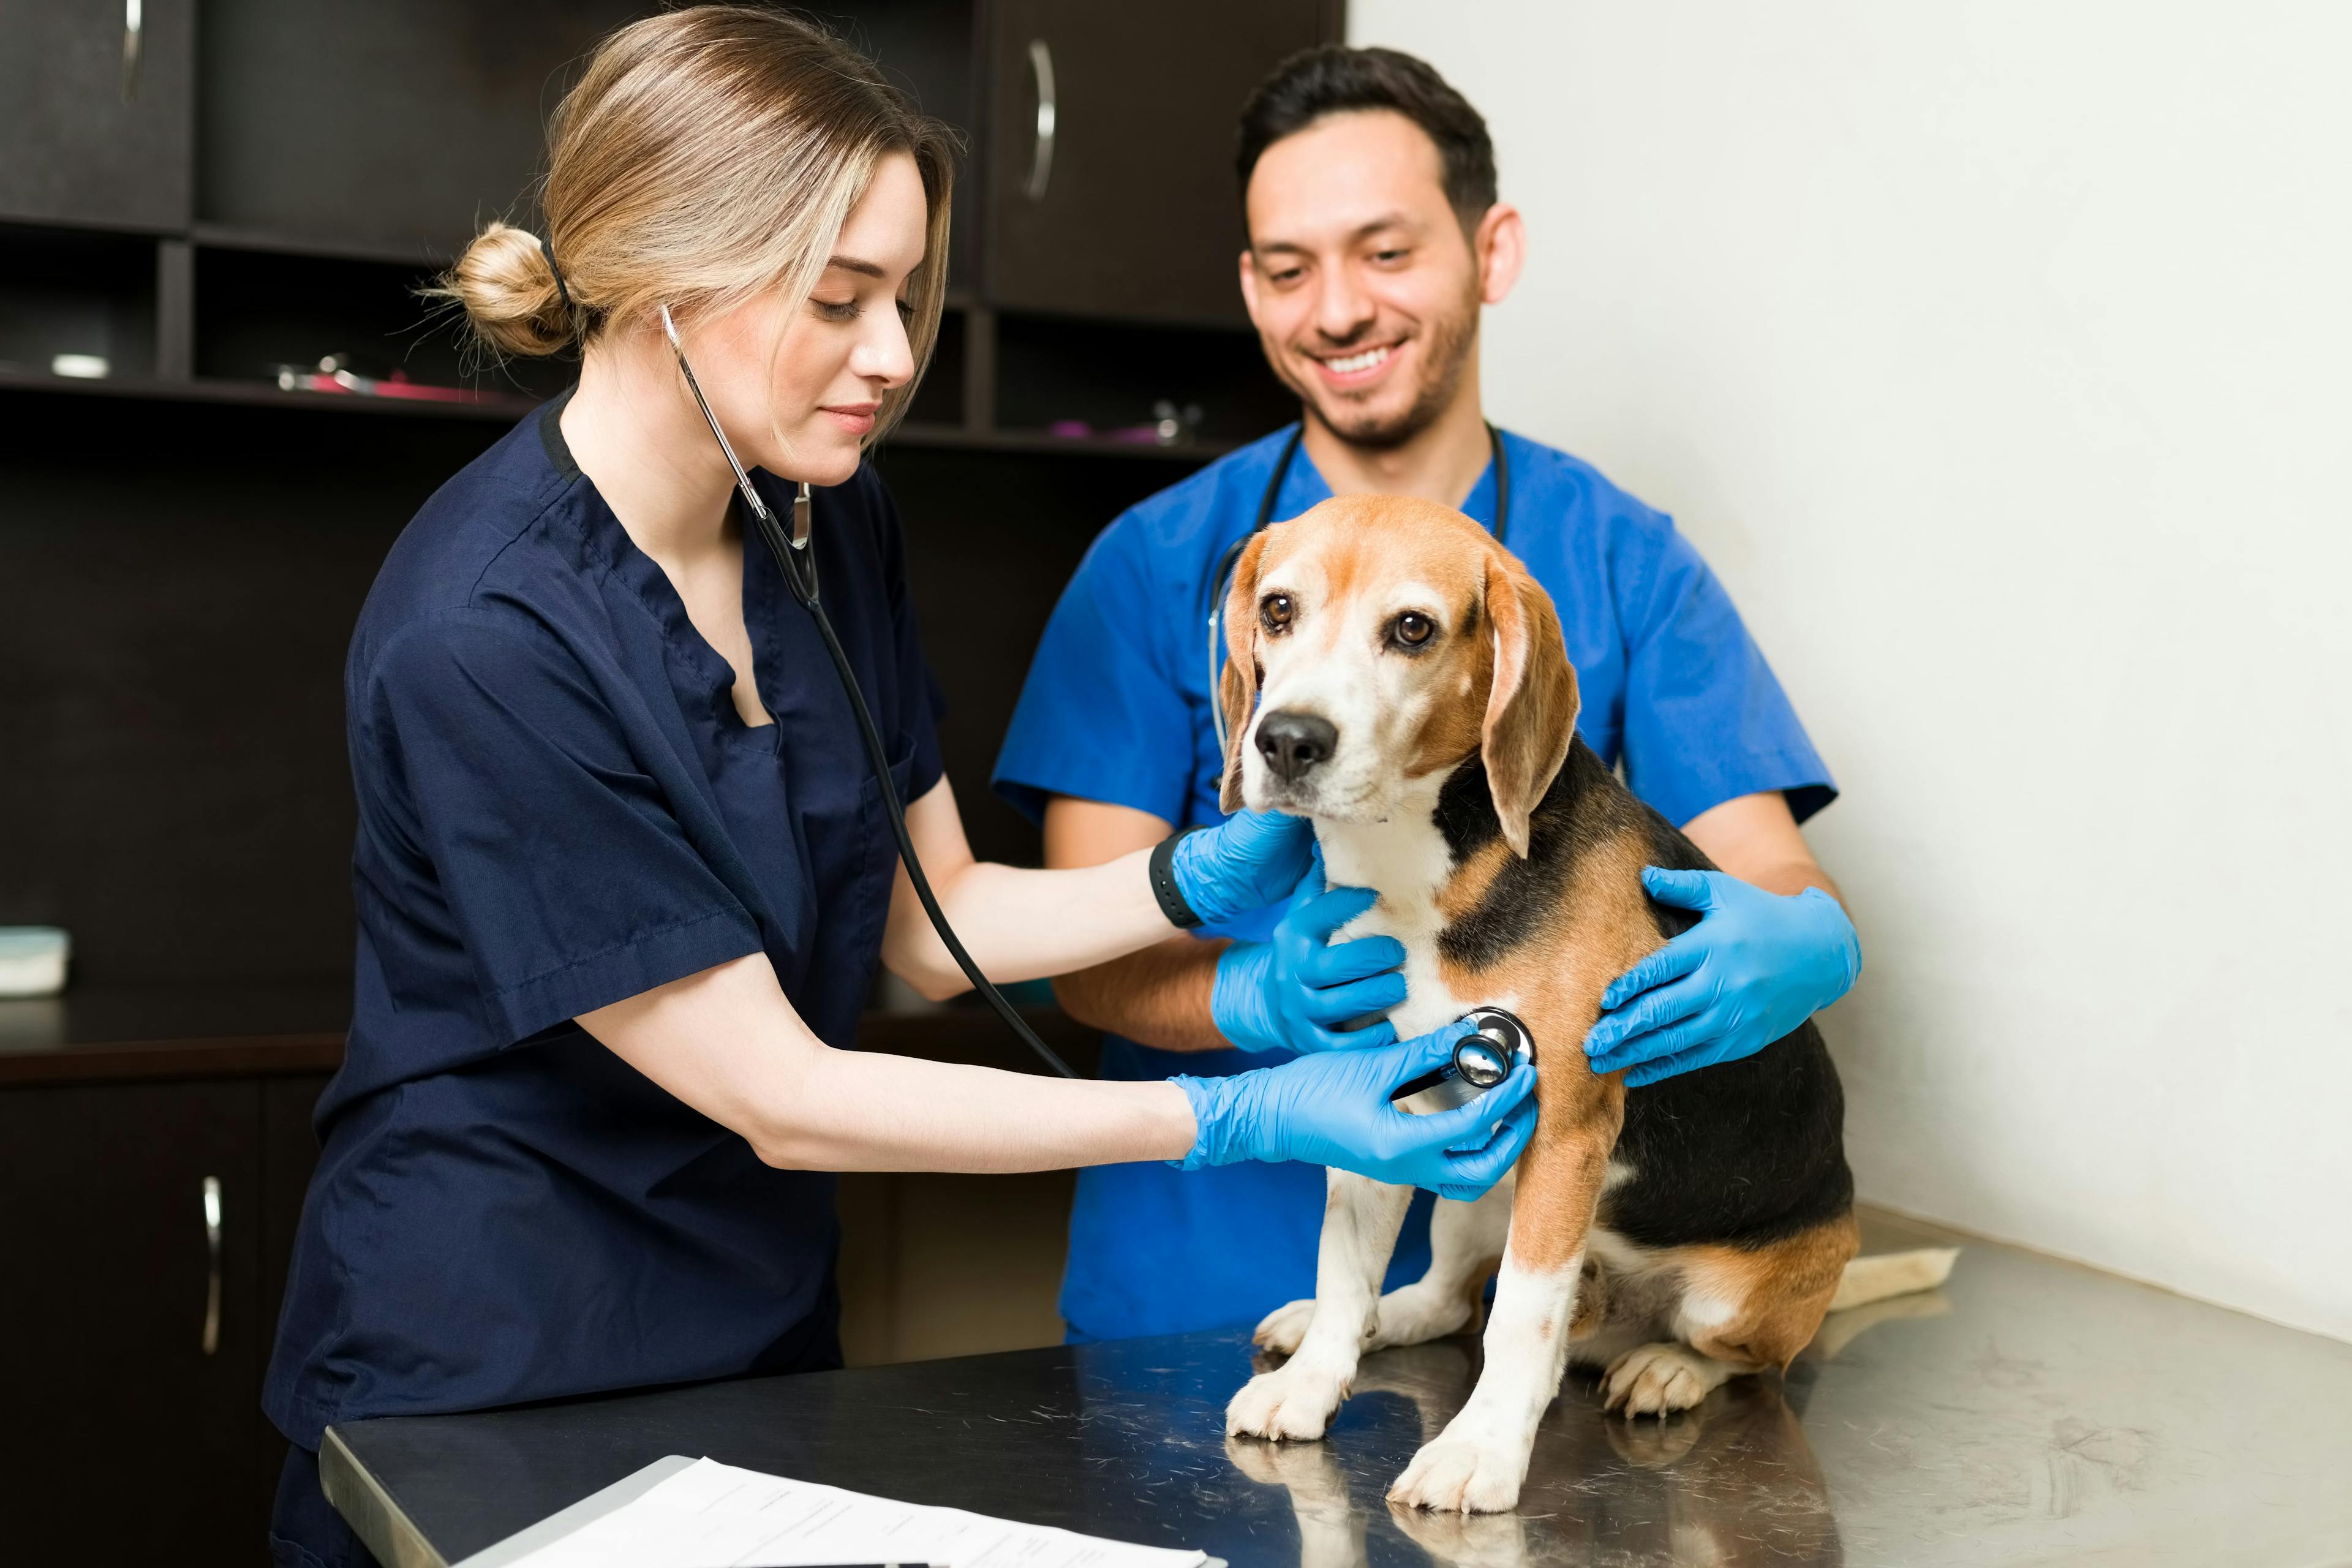 AcupunctureConsultation: A veterinarian discussing the acupuncture treatment plan with a dog owner